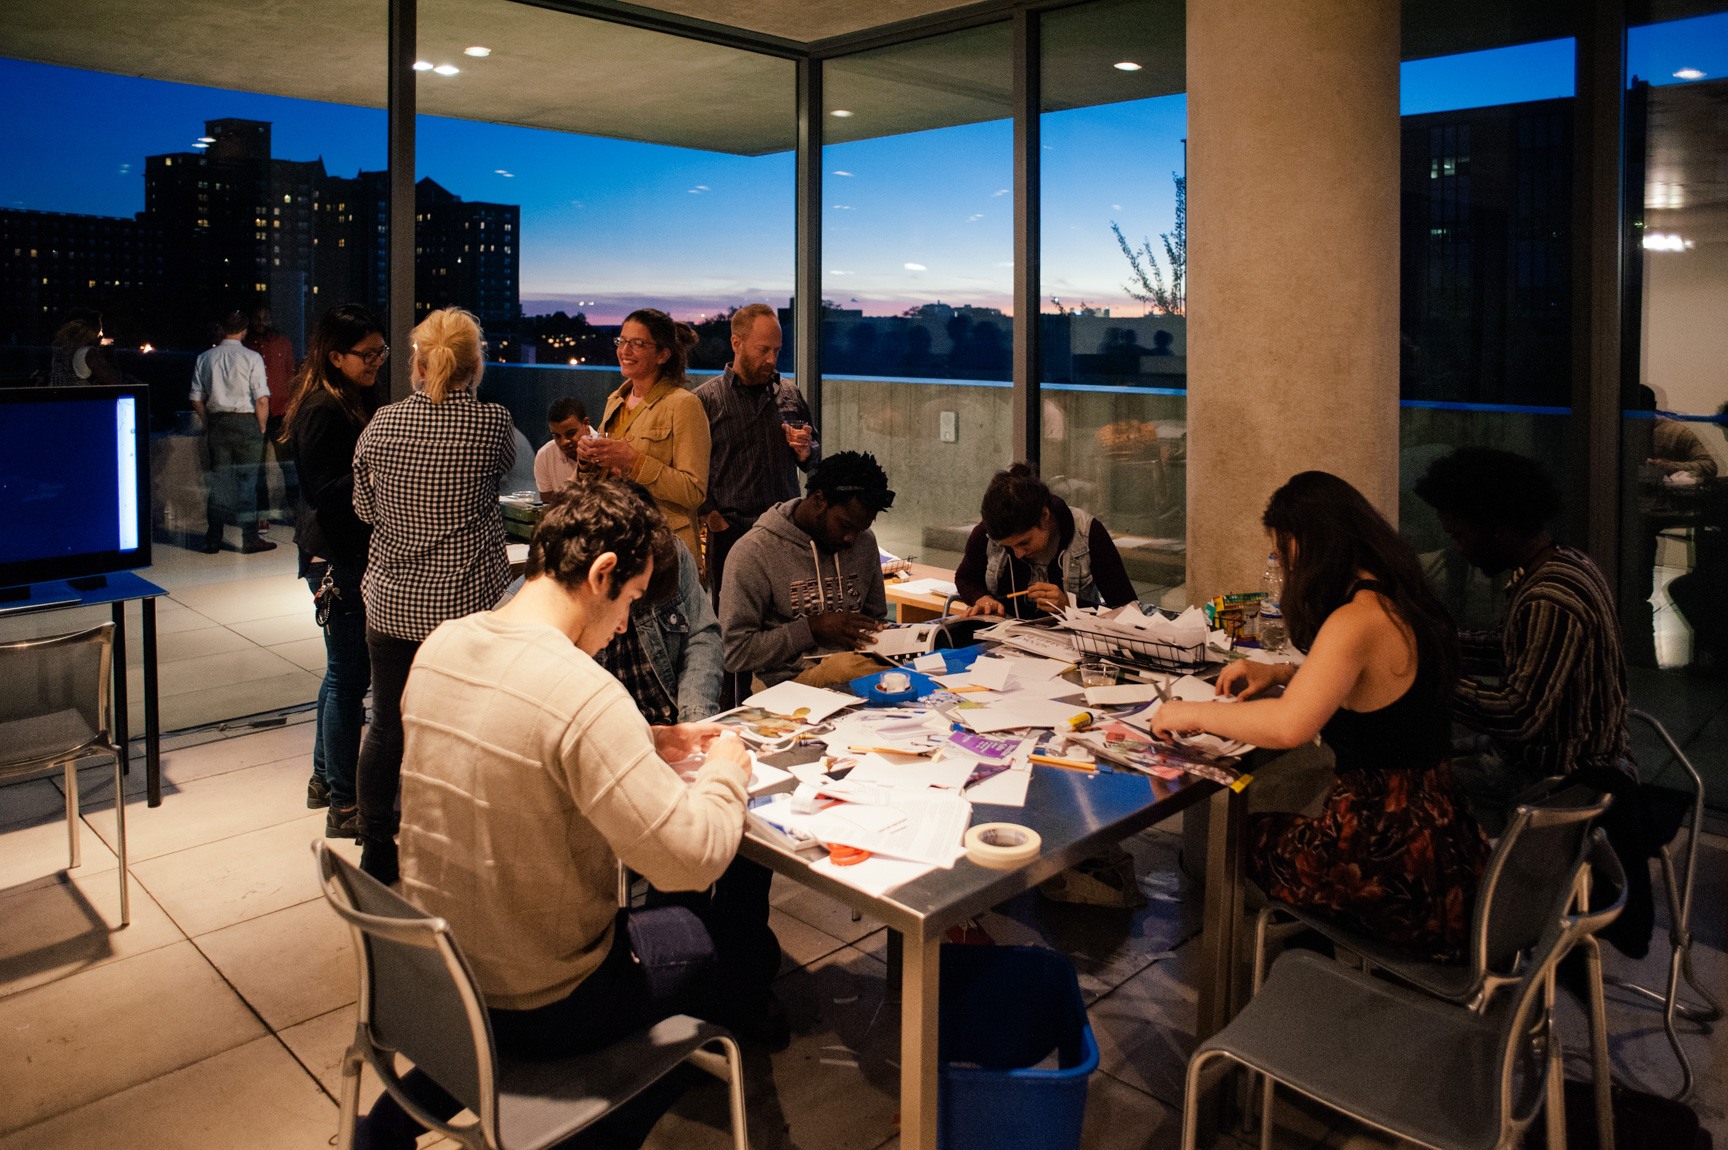 Visitors engage in a workshop activity at tables in the Mezzanine.